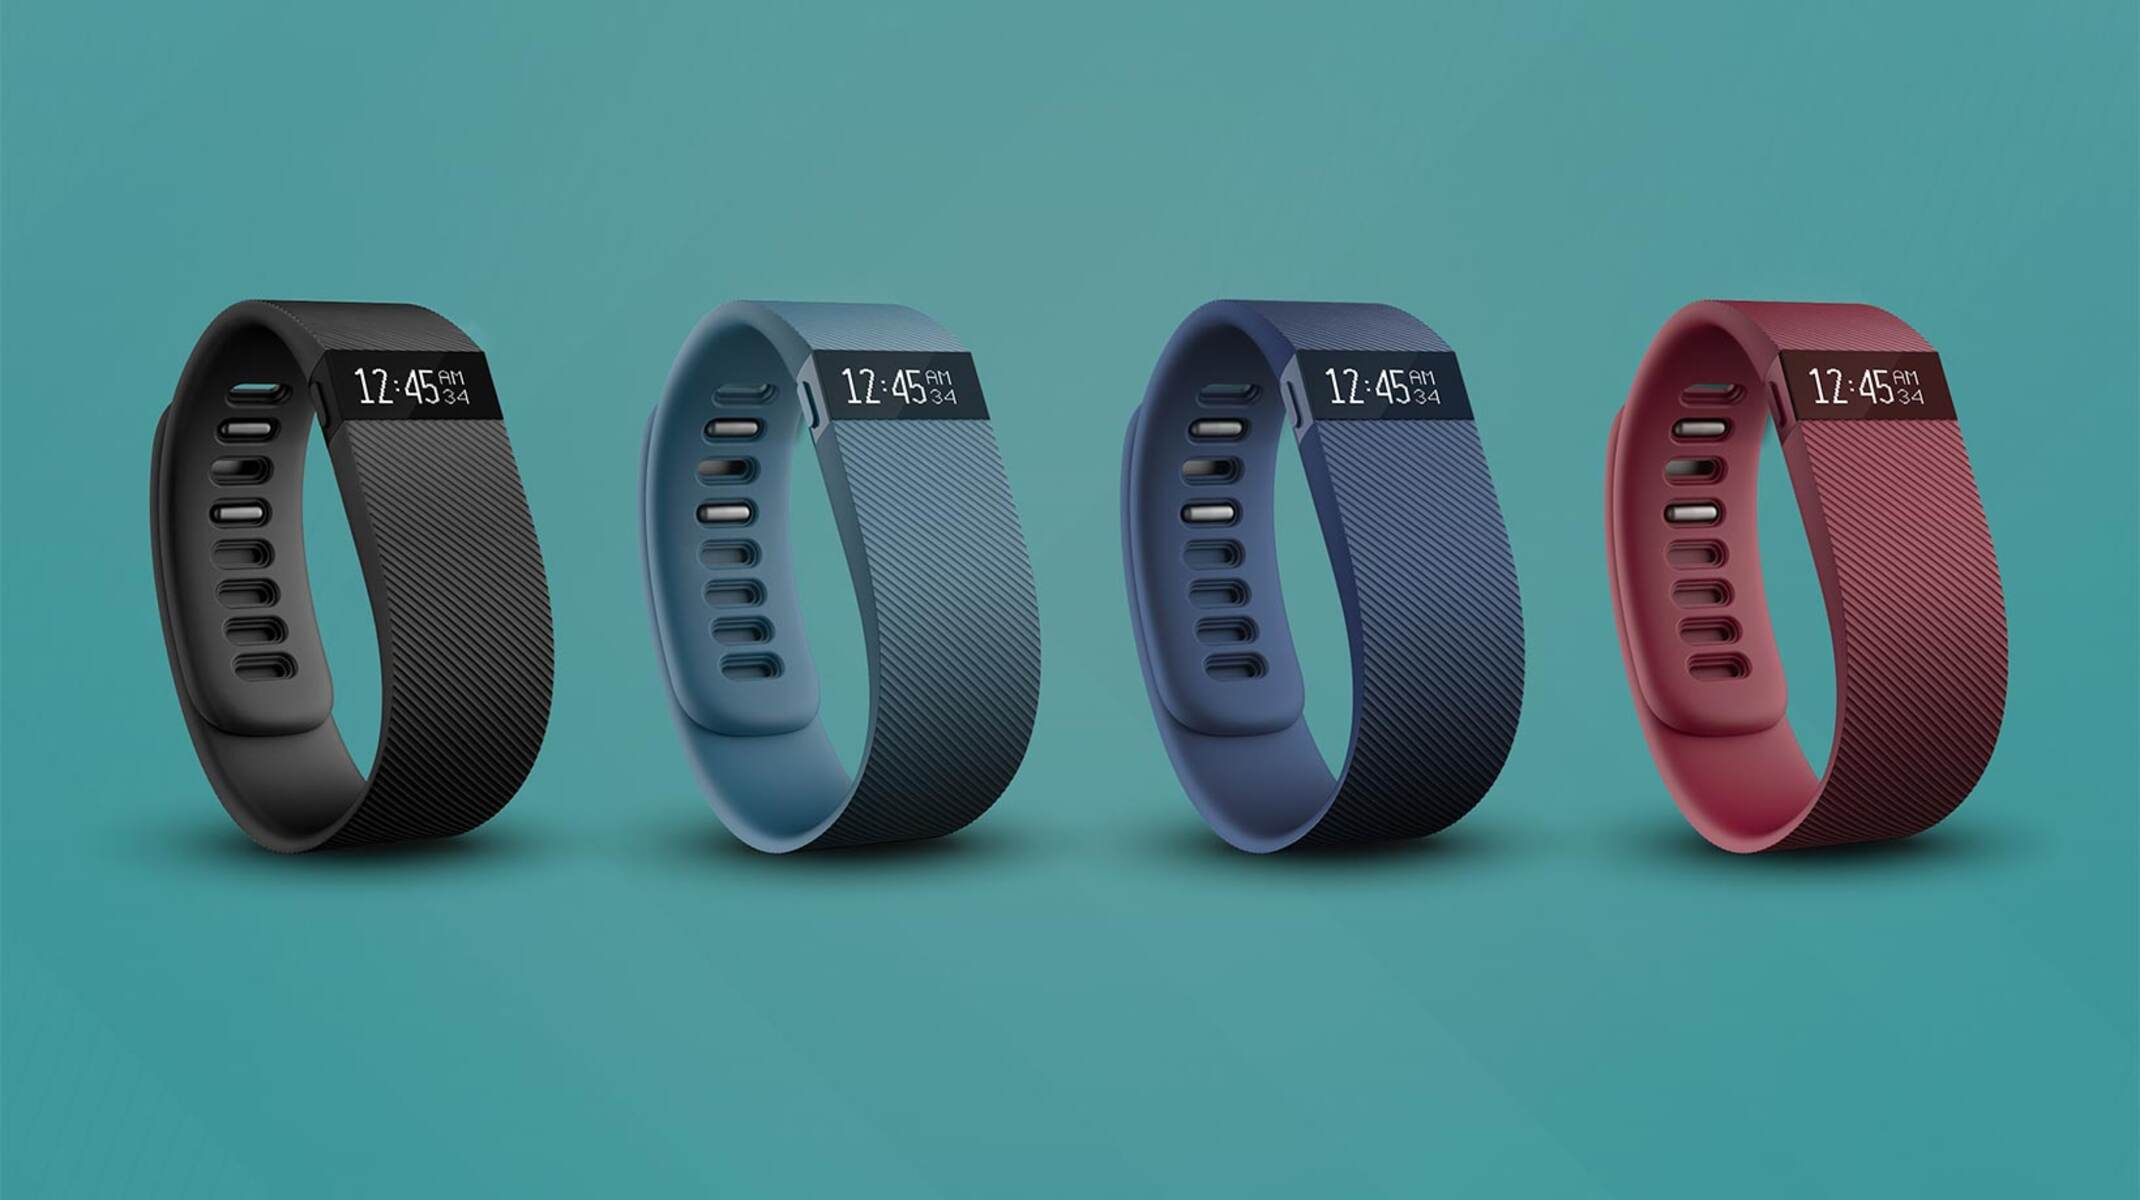 Charge HR Time Change: A Guide To Changing The Time On Fitbit Charge HR